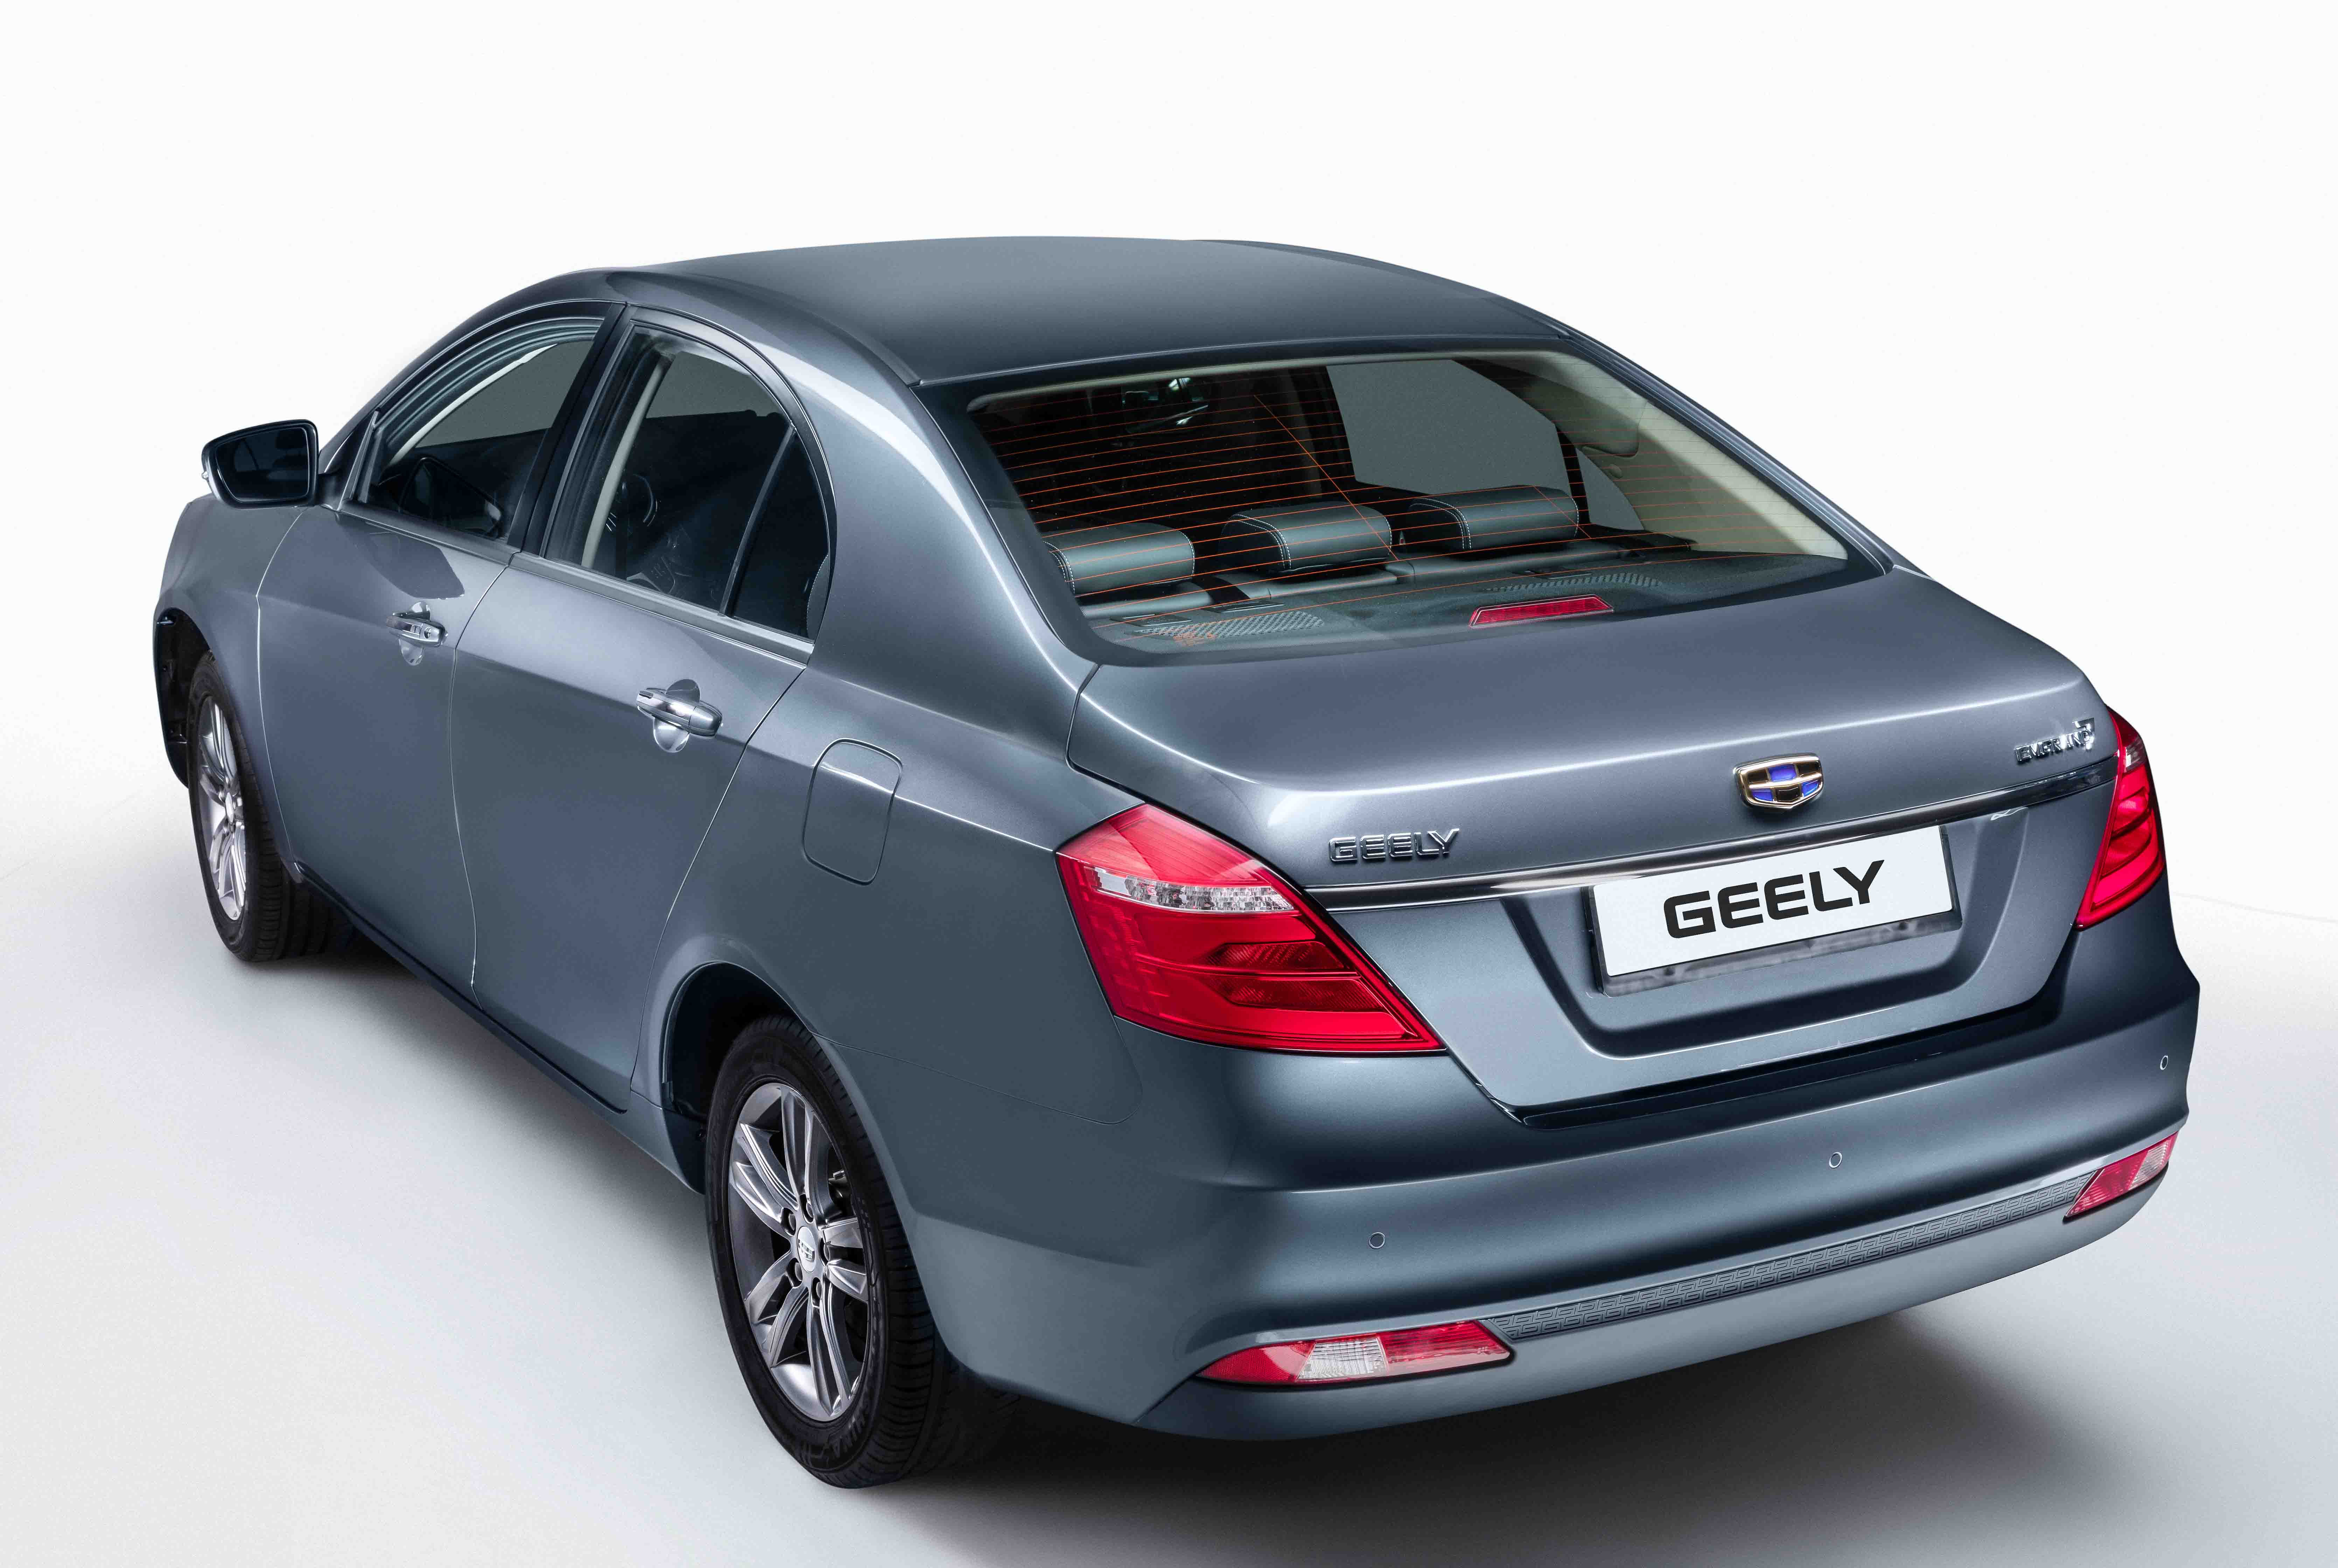 Geely Emgrand 7 best model